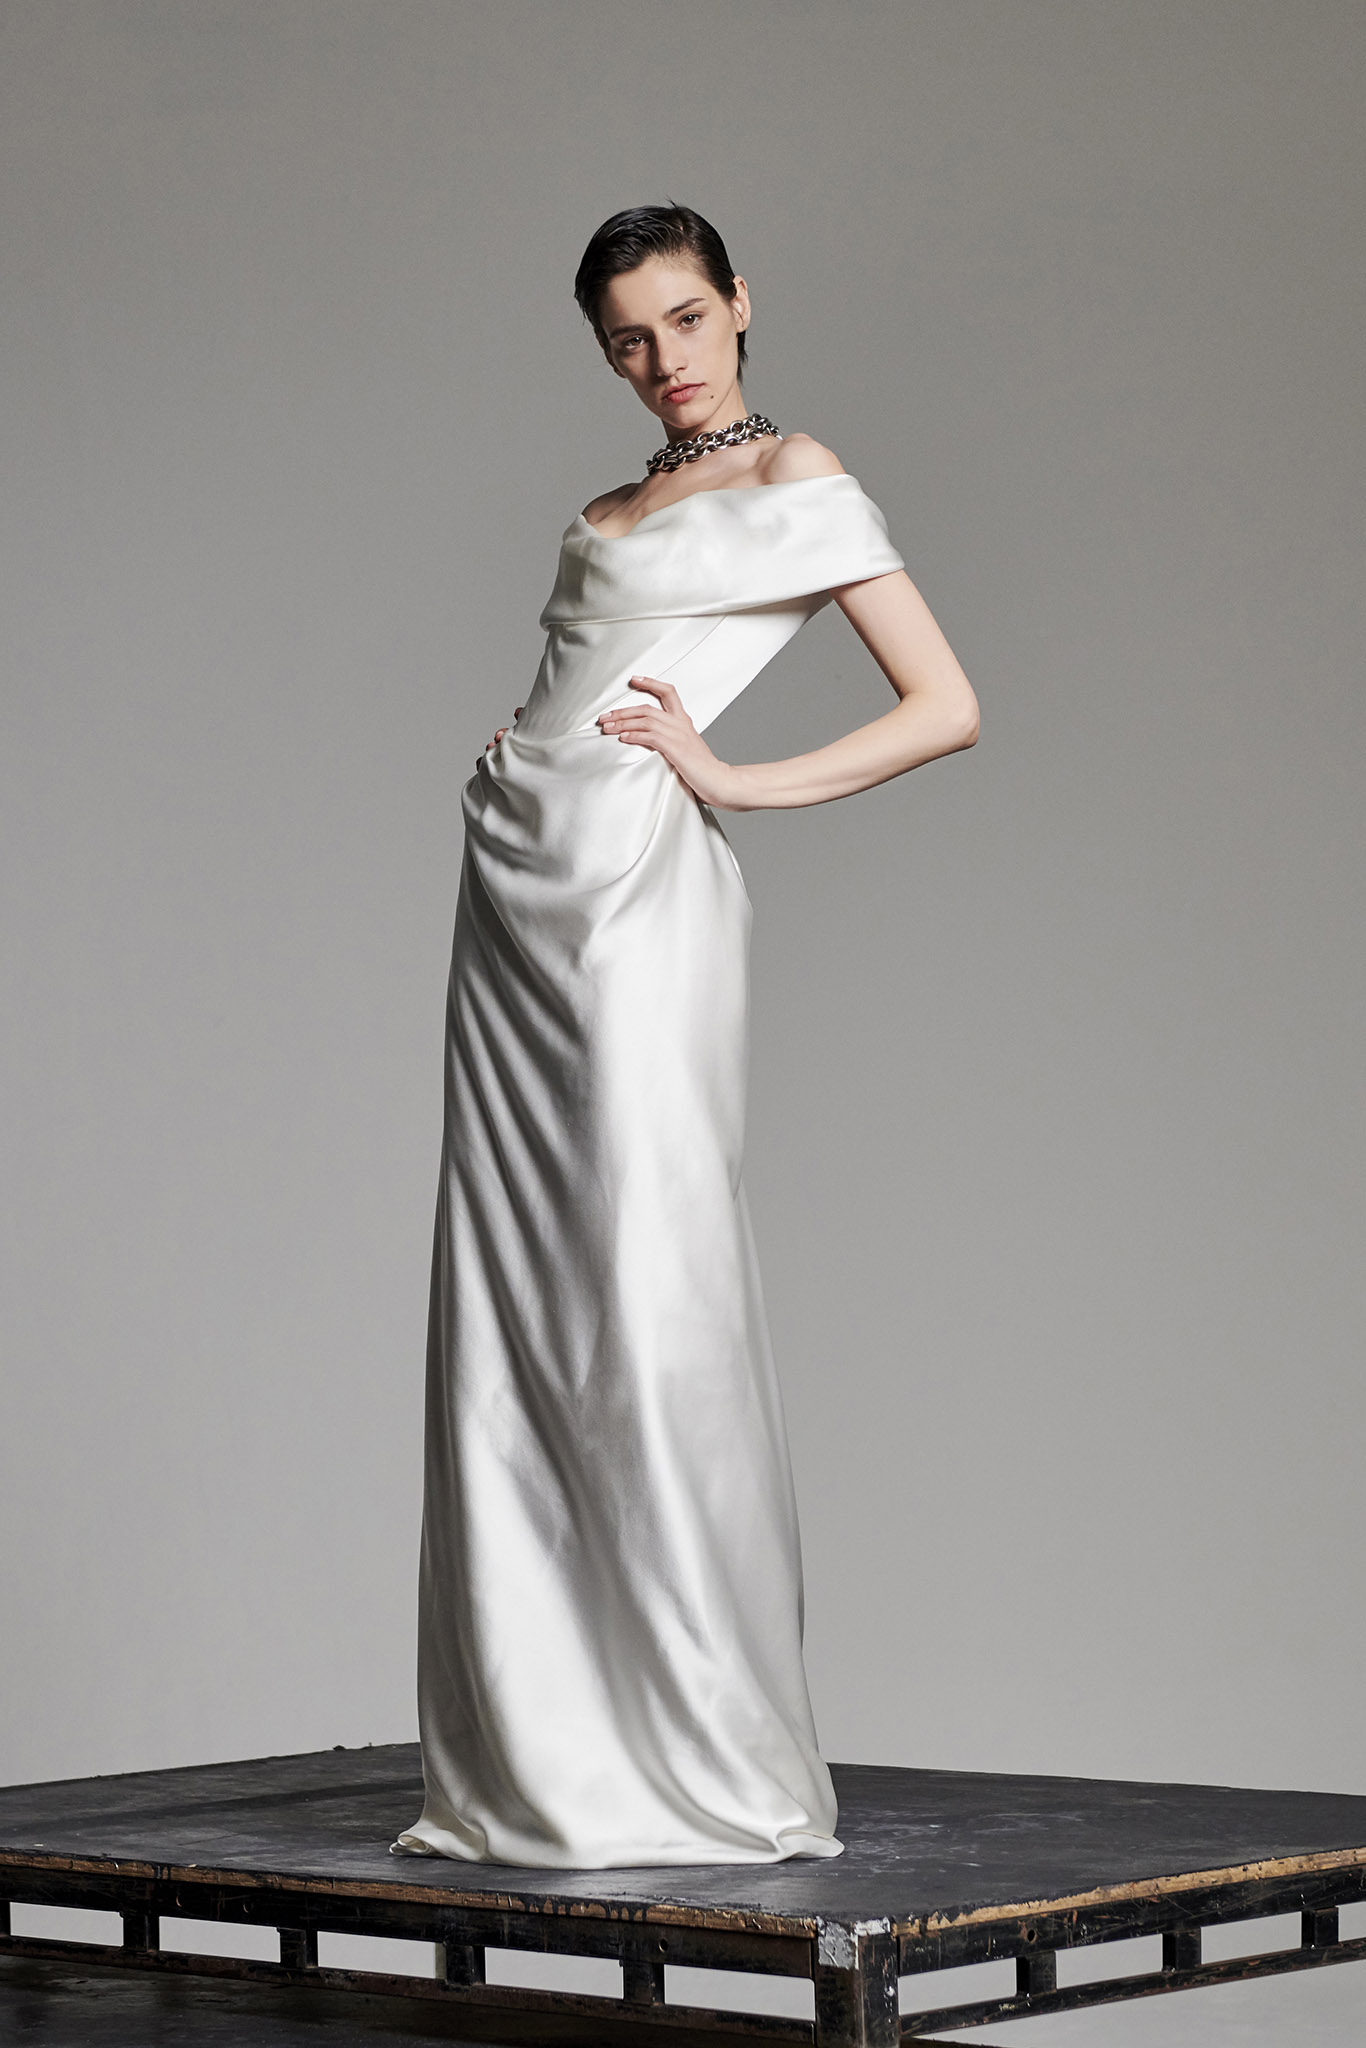 Vivienne Westwood Wedding Dress Price - How do you Price a Switches?